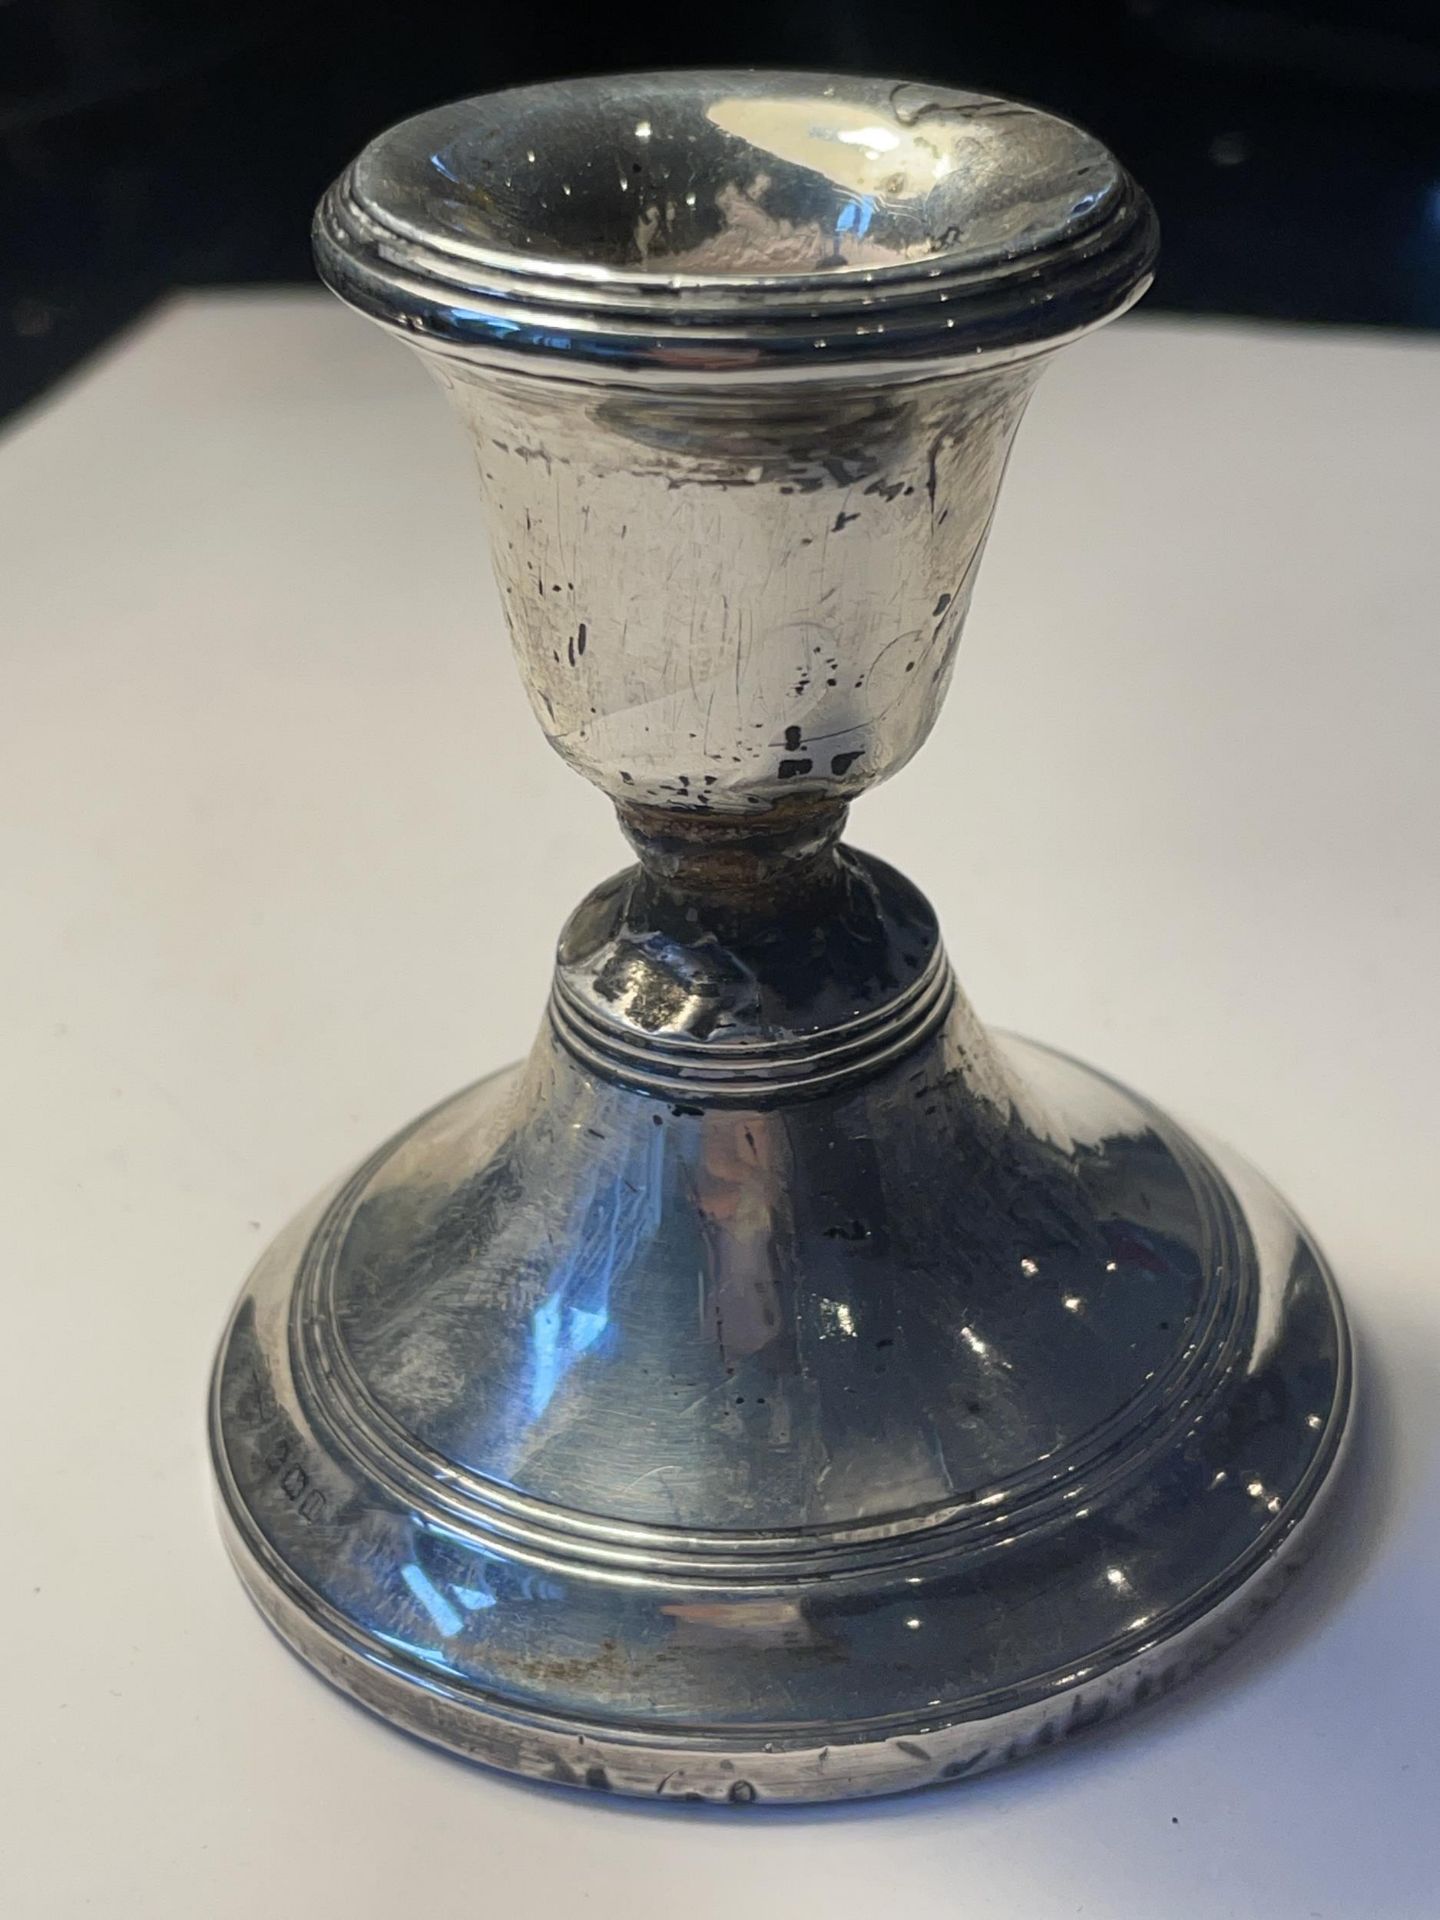 A HALLMARKED BIRMINGHAM SILVER CANDLESTICK WITH WEIGHTED BASE